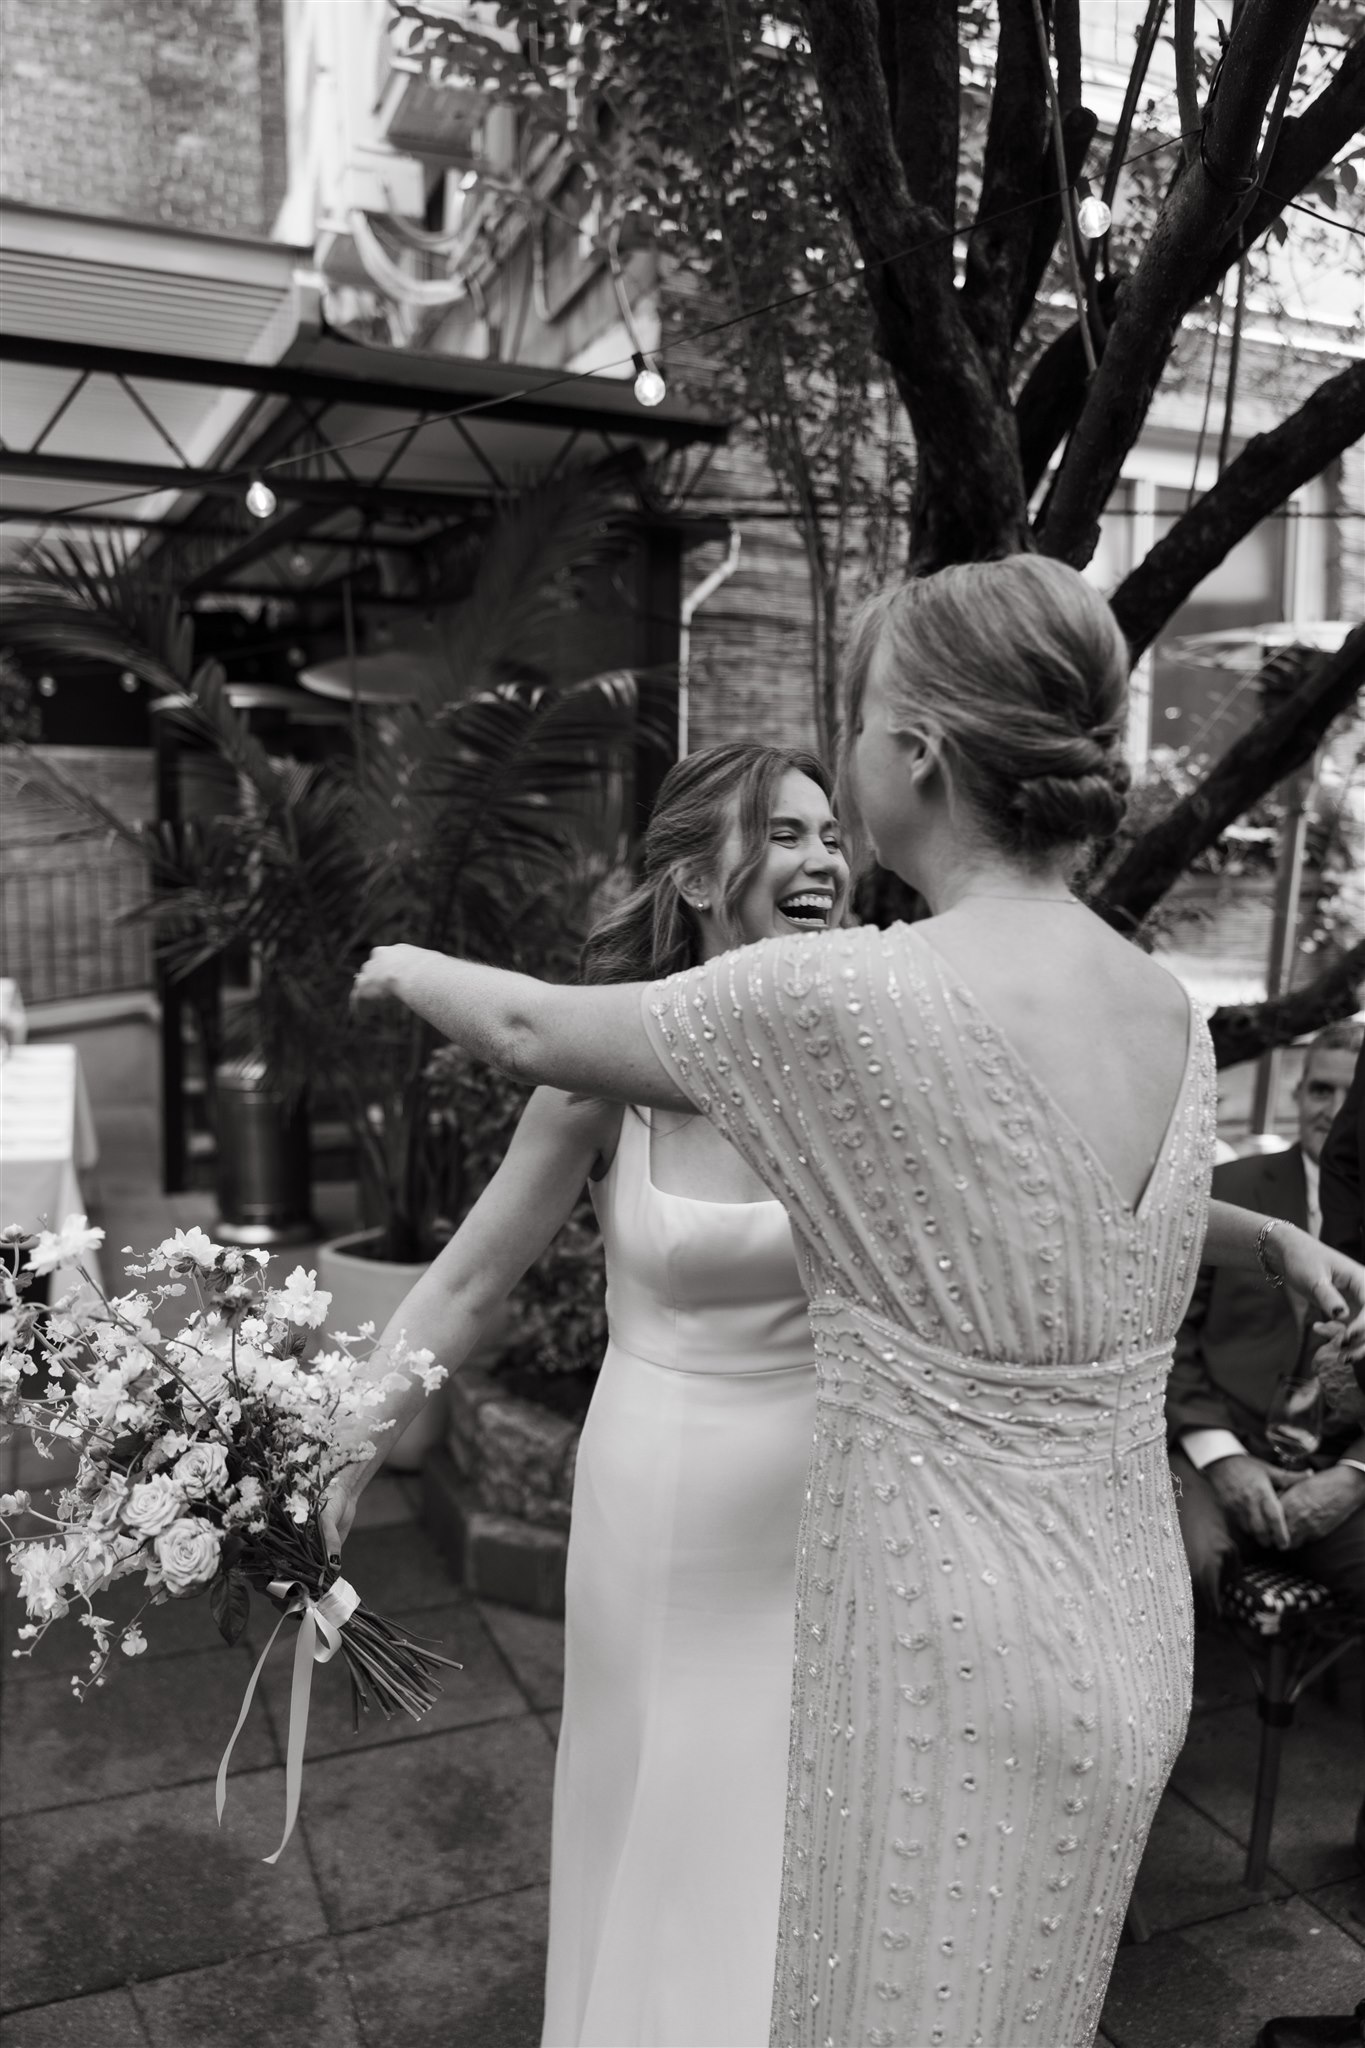 Two women, one in a white wedding dress and the other in a beaded dress, joyfully greet each other at an outdoor wedding, surrounded by guests and greenery.